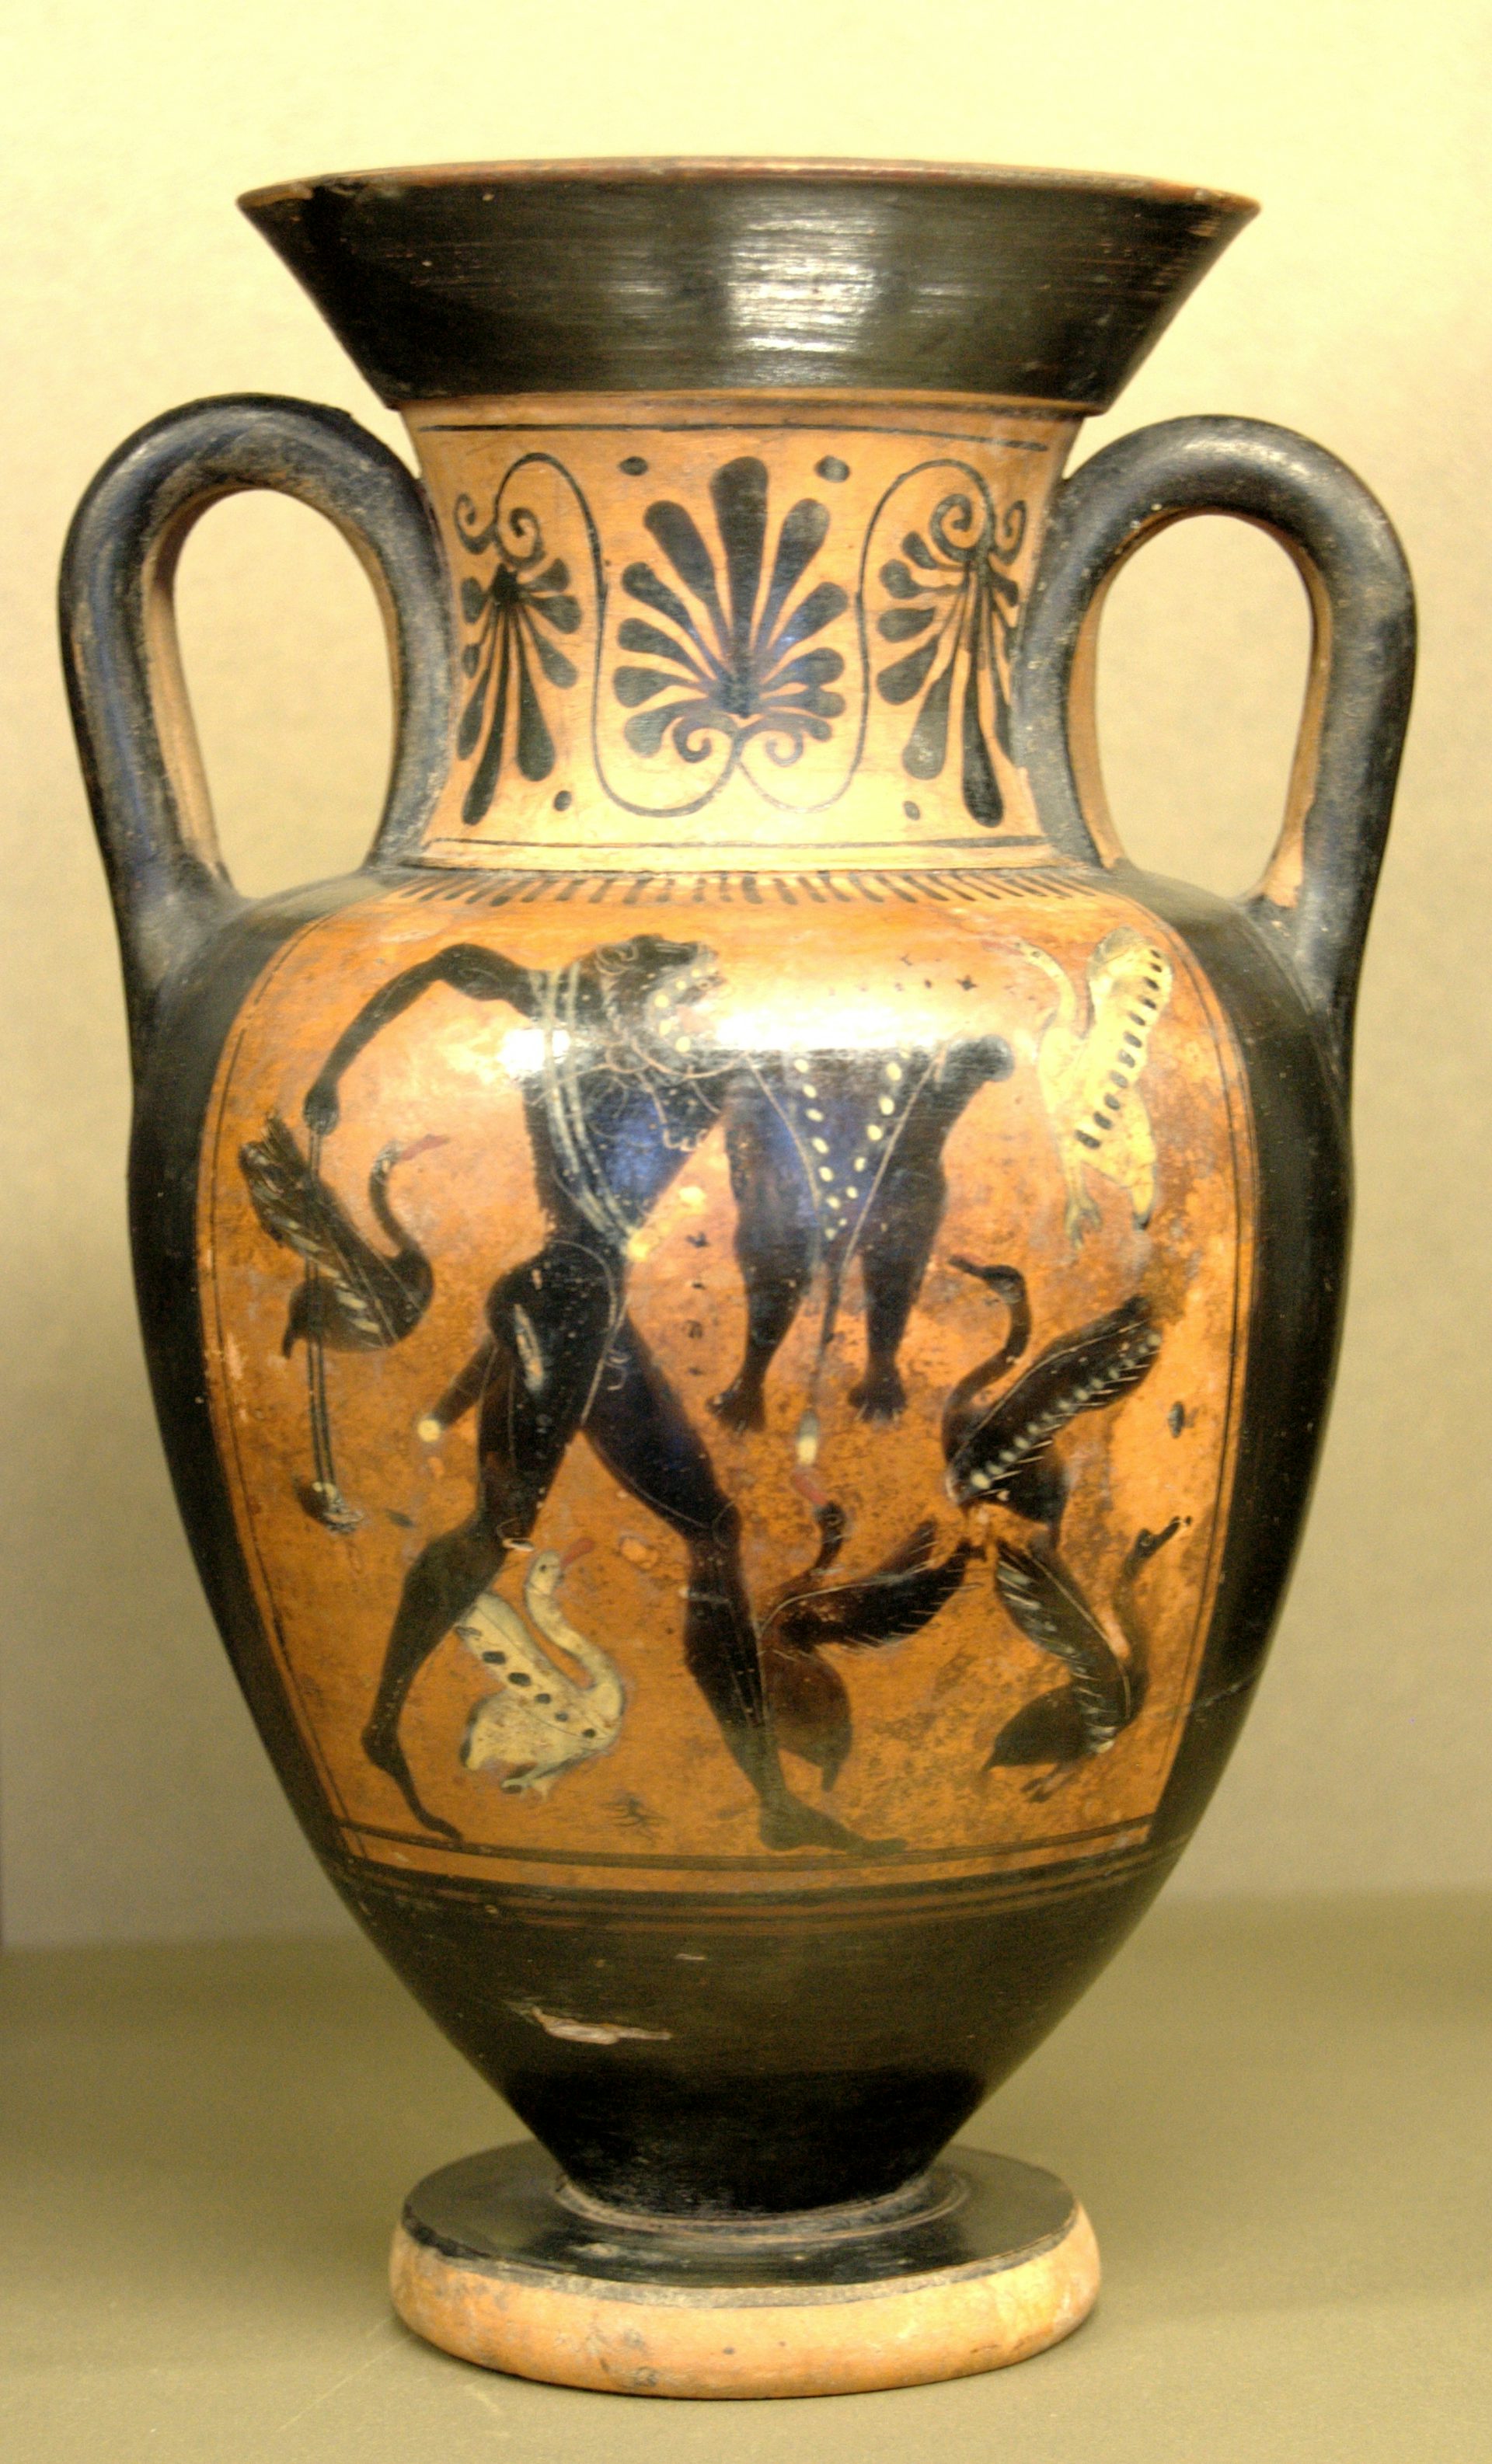 Vase painting of Heracles fighting the Stymphalian Birds by the Diosophos Painter